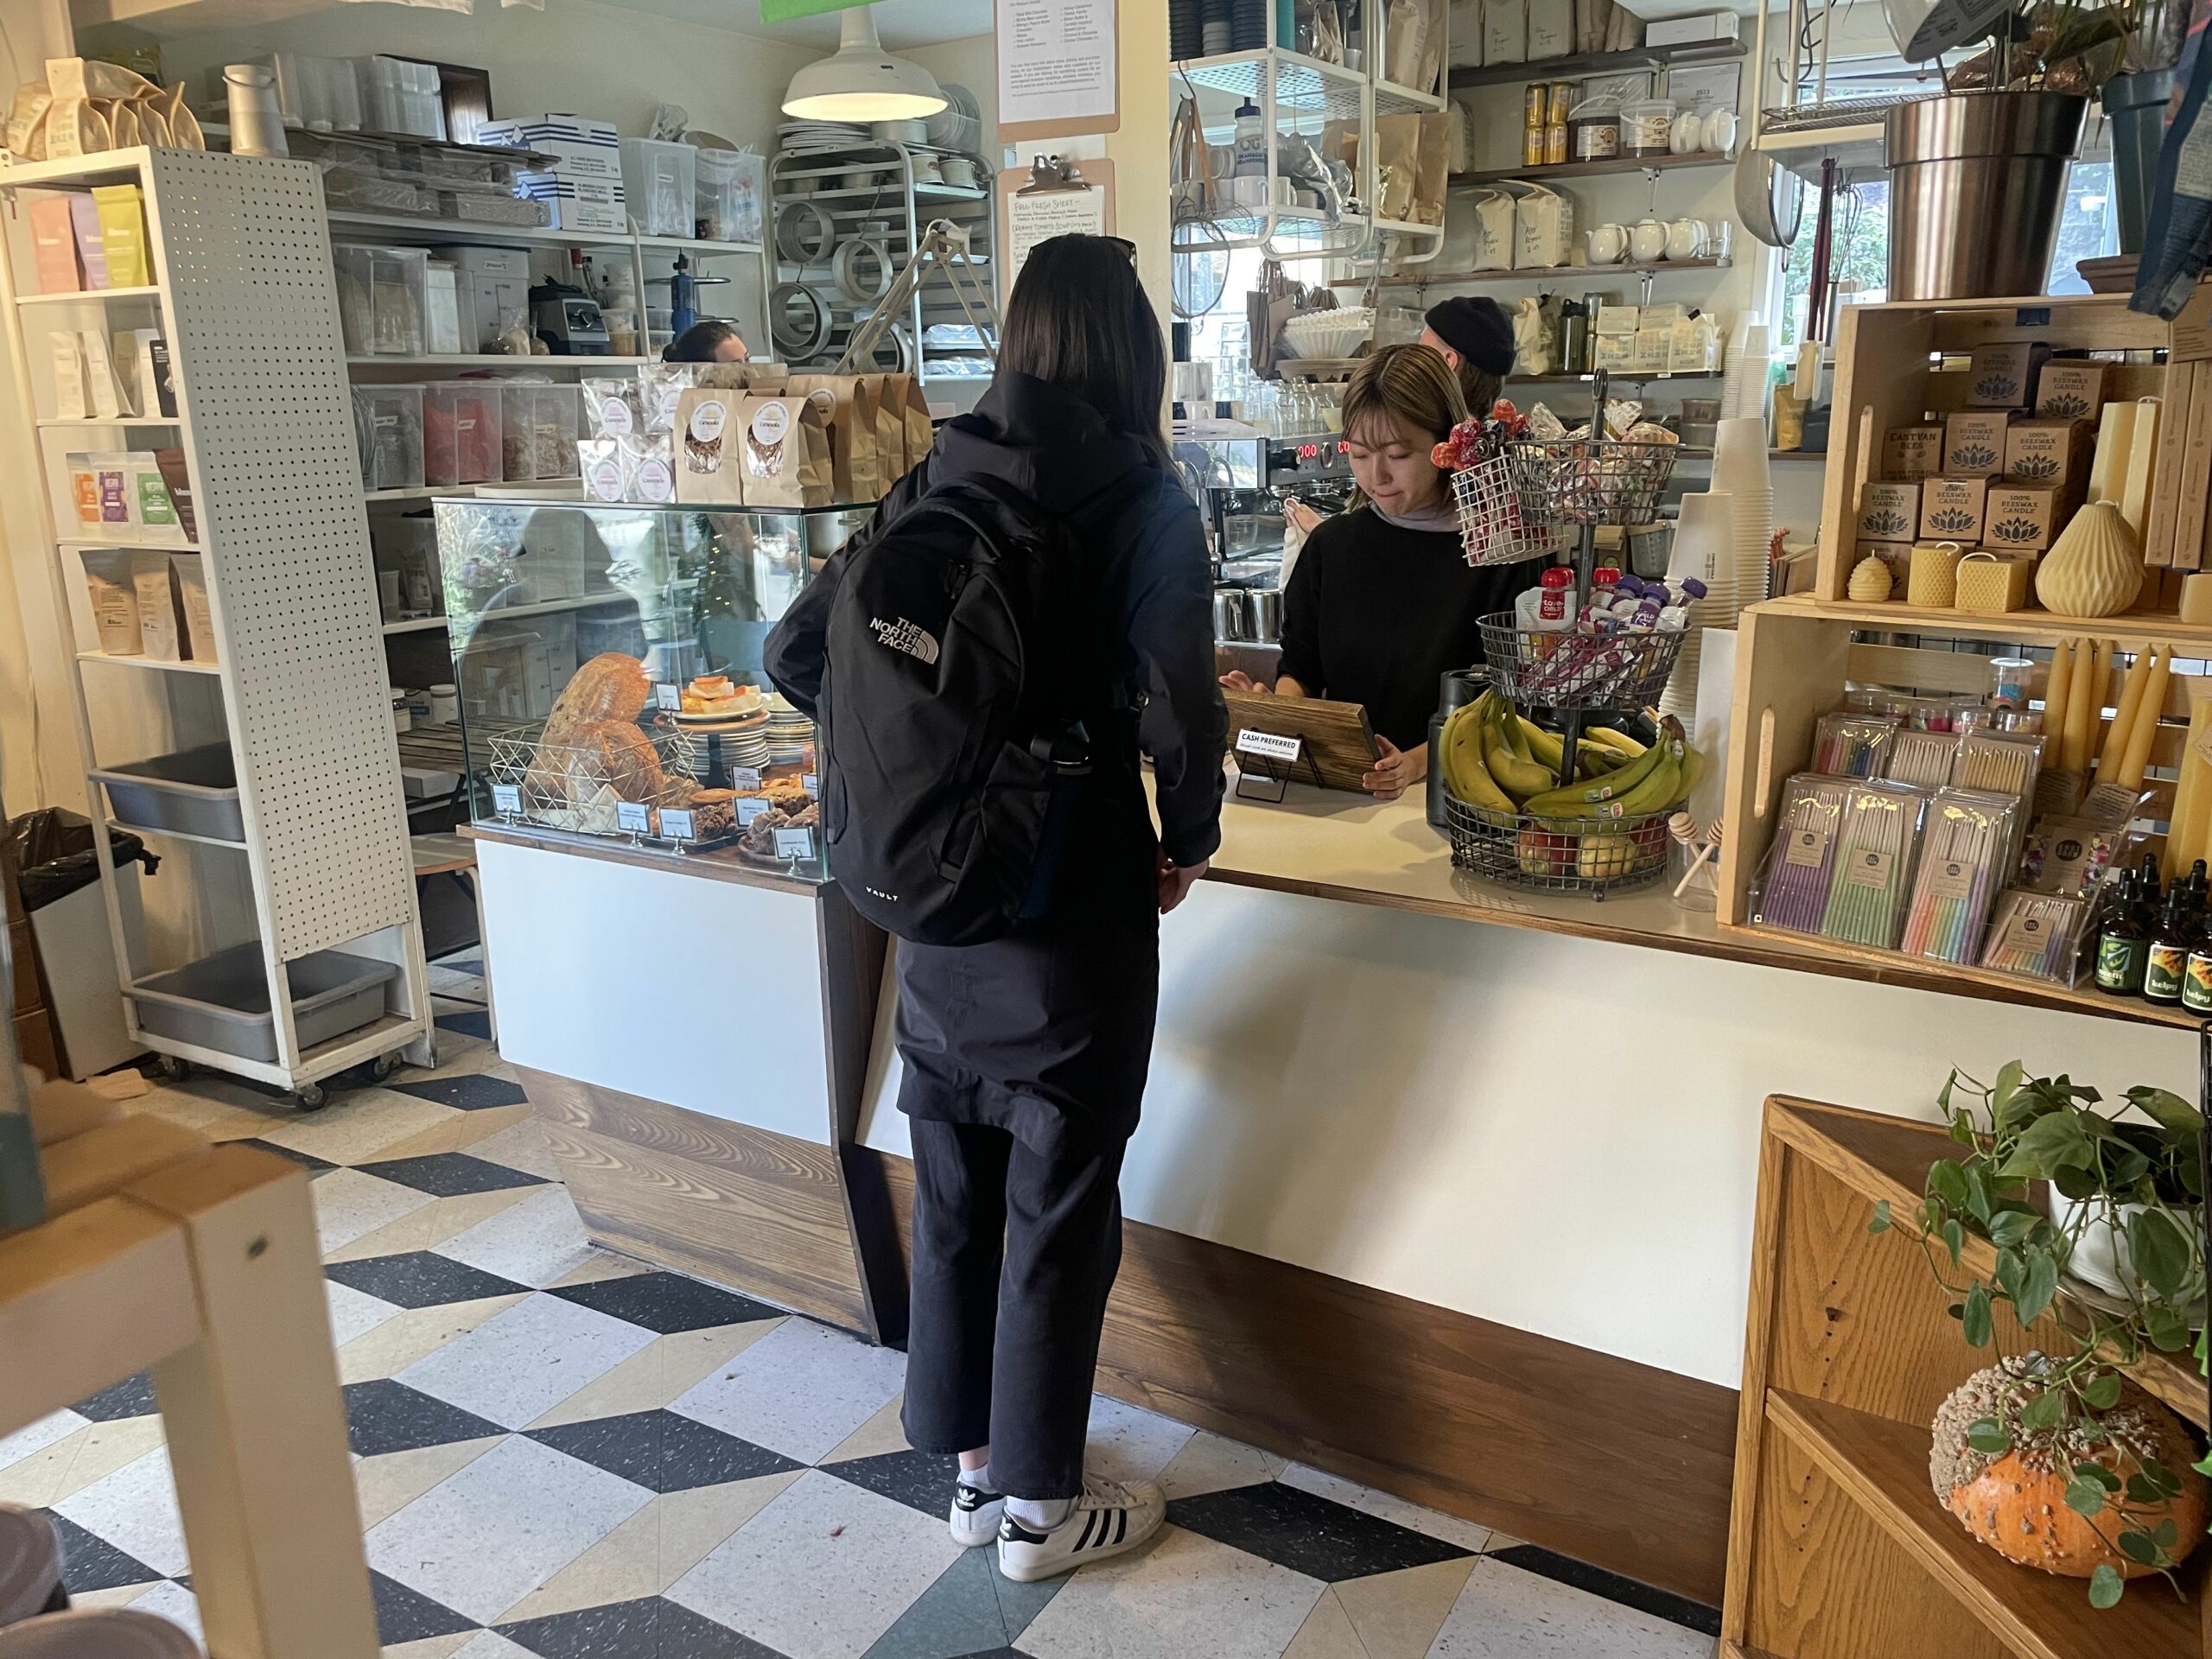 A person with a backpack is standing at a counter with a worker on the other side. The store has a black diamond, checkered floor and is filled with food and artisan items.